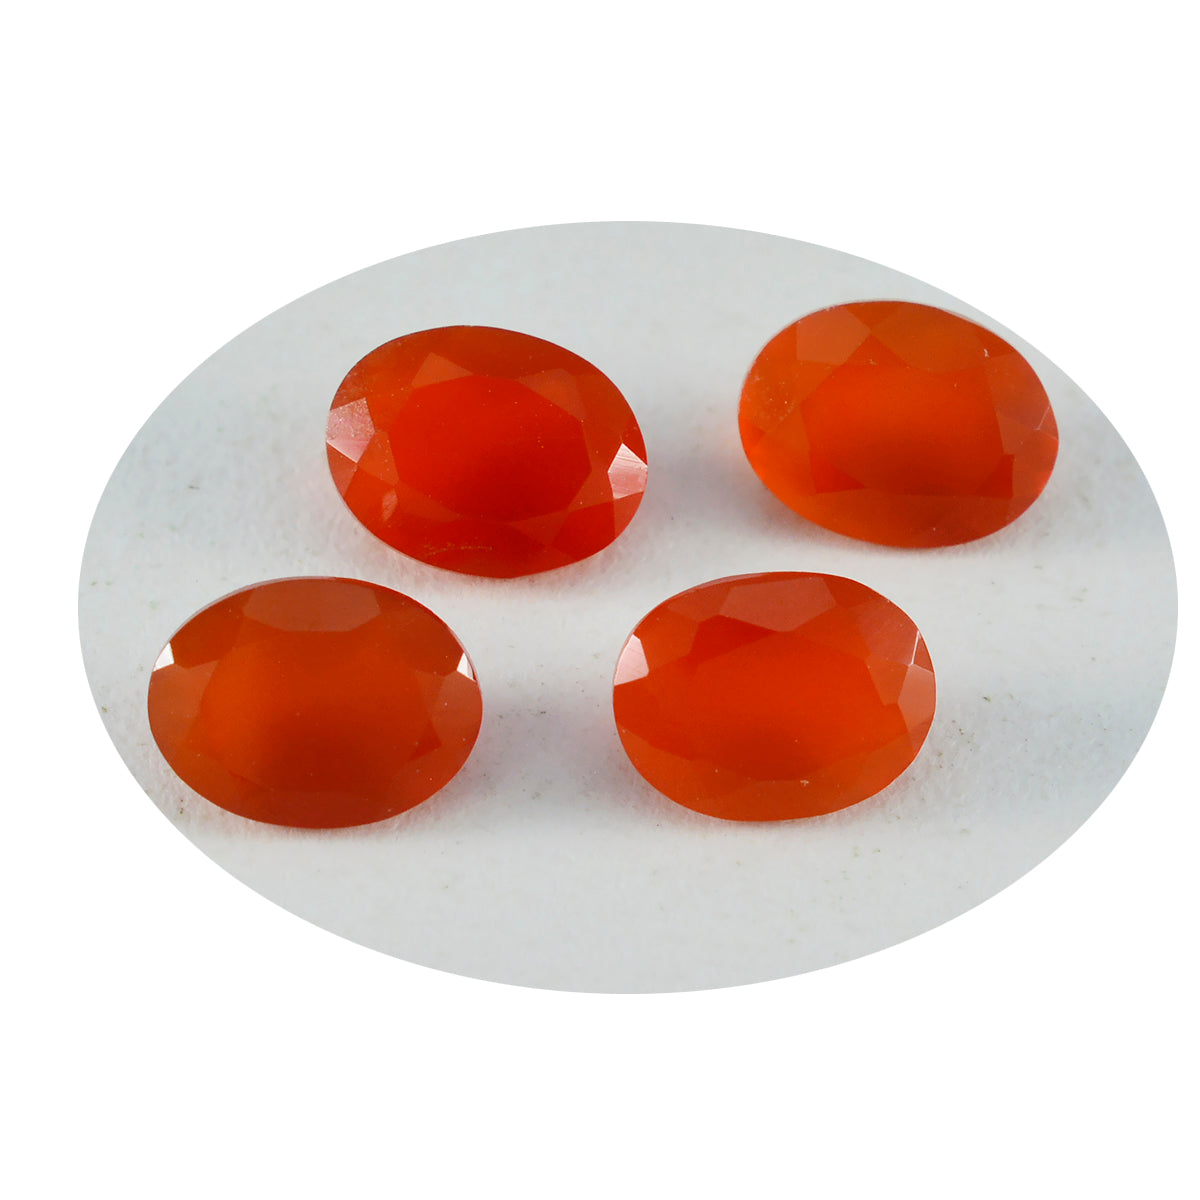 Riyogems 1PC Natural Red Onyx Faceted 10x12 mm Oval Shape great Quality Stone